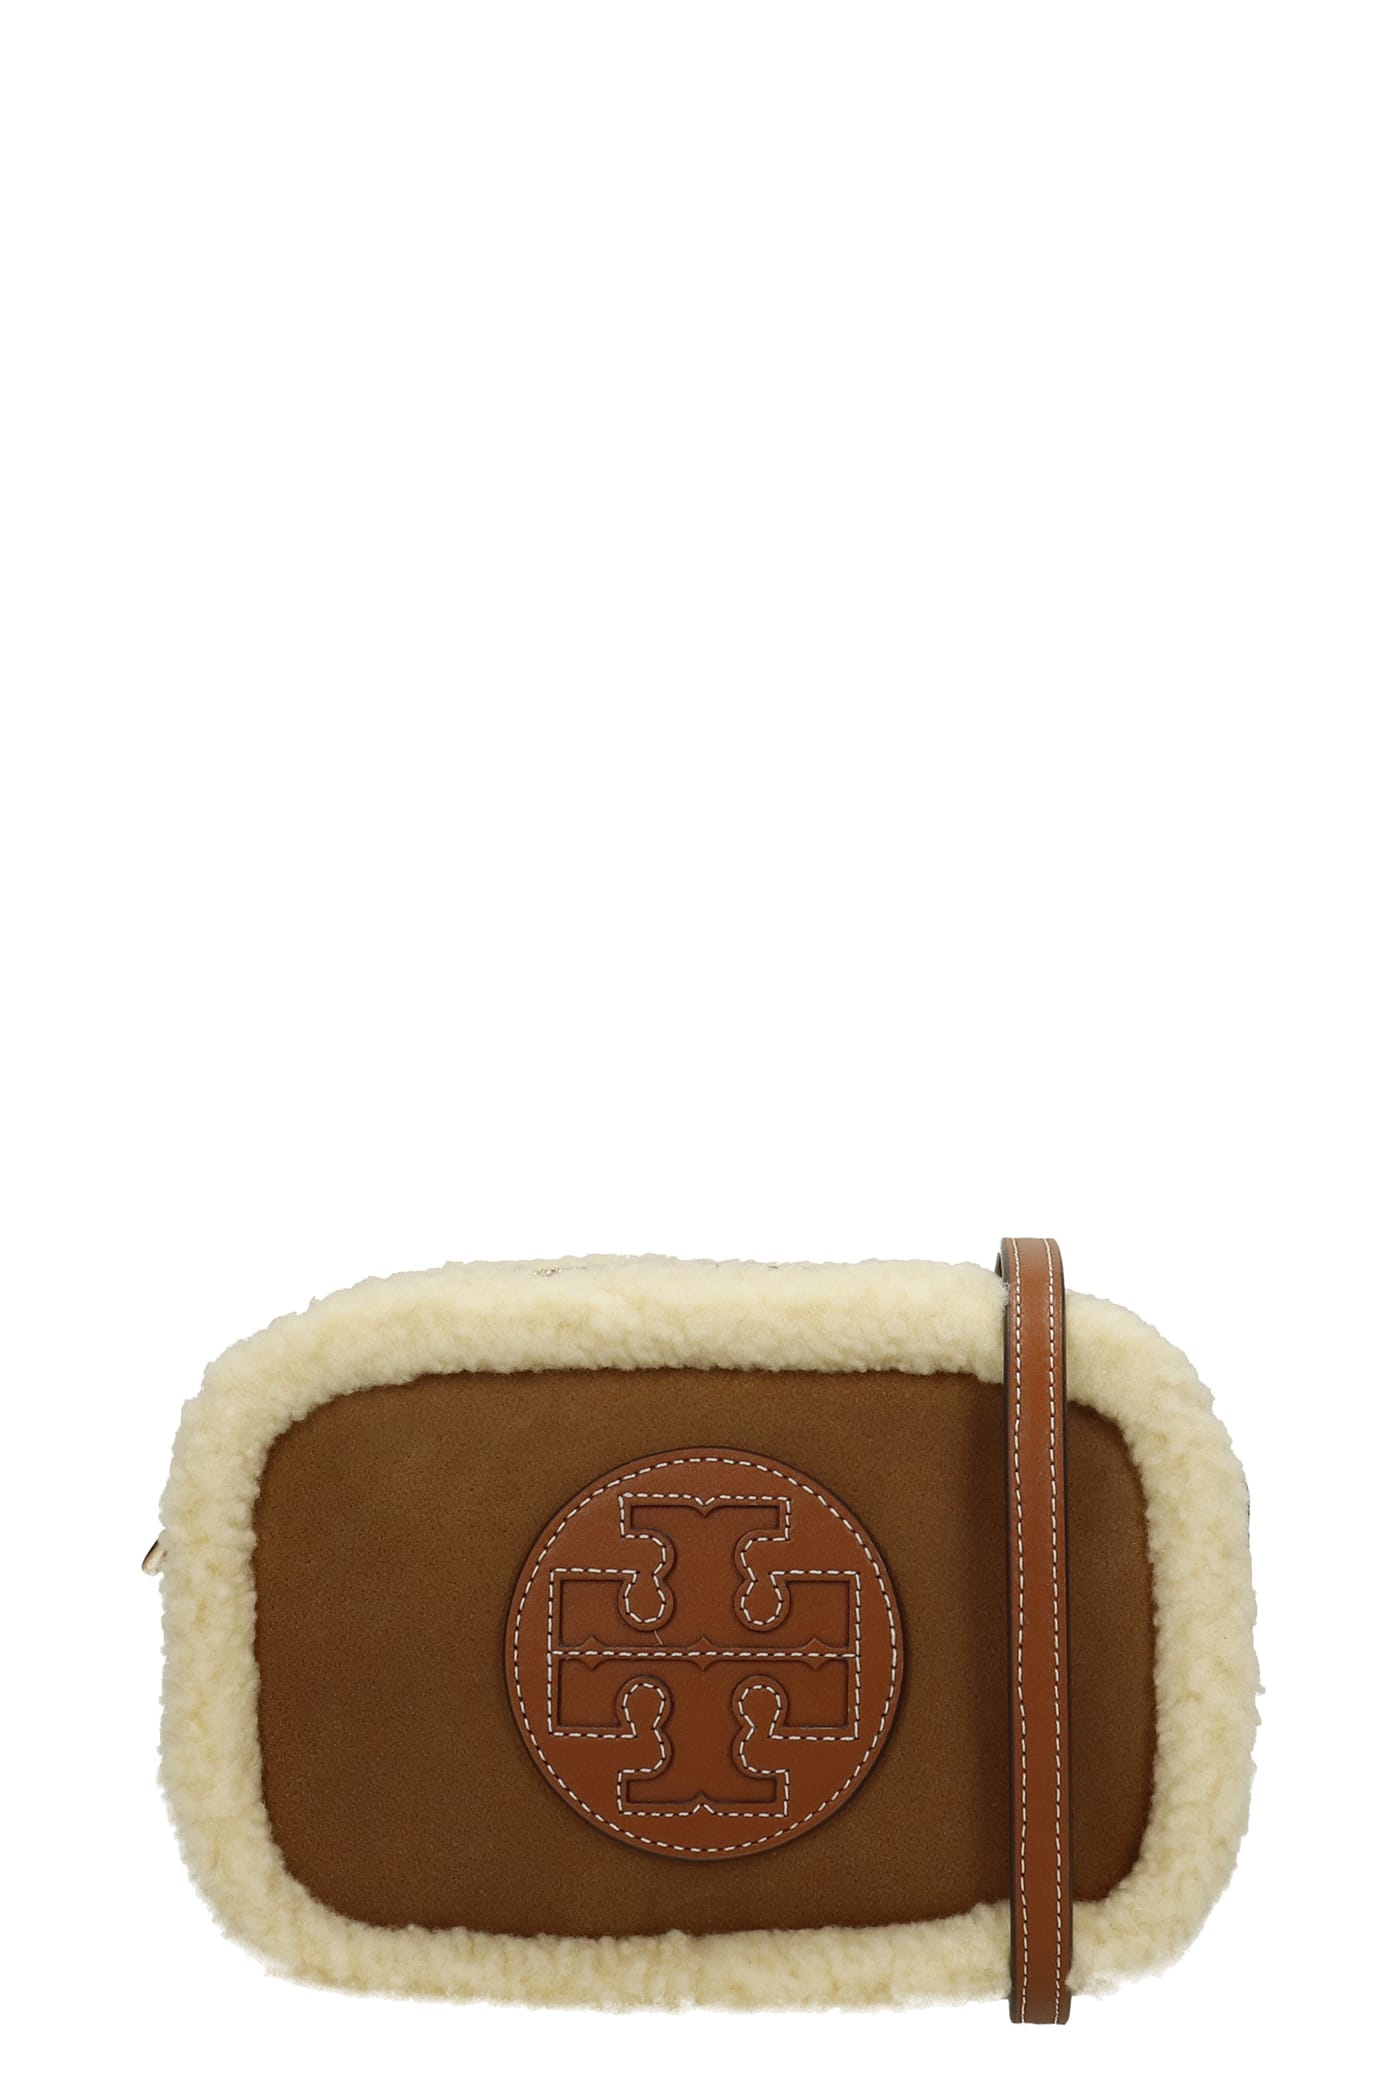 Tory Burch Perry Bombe Shoulder Bag In Brown Leather